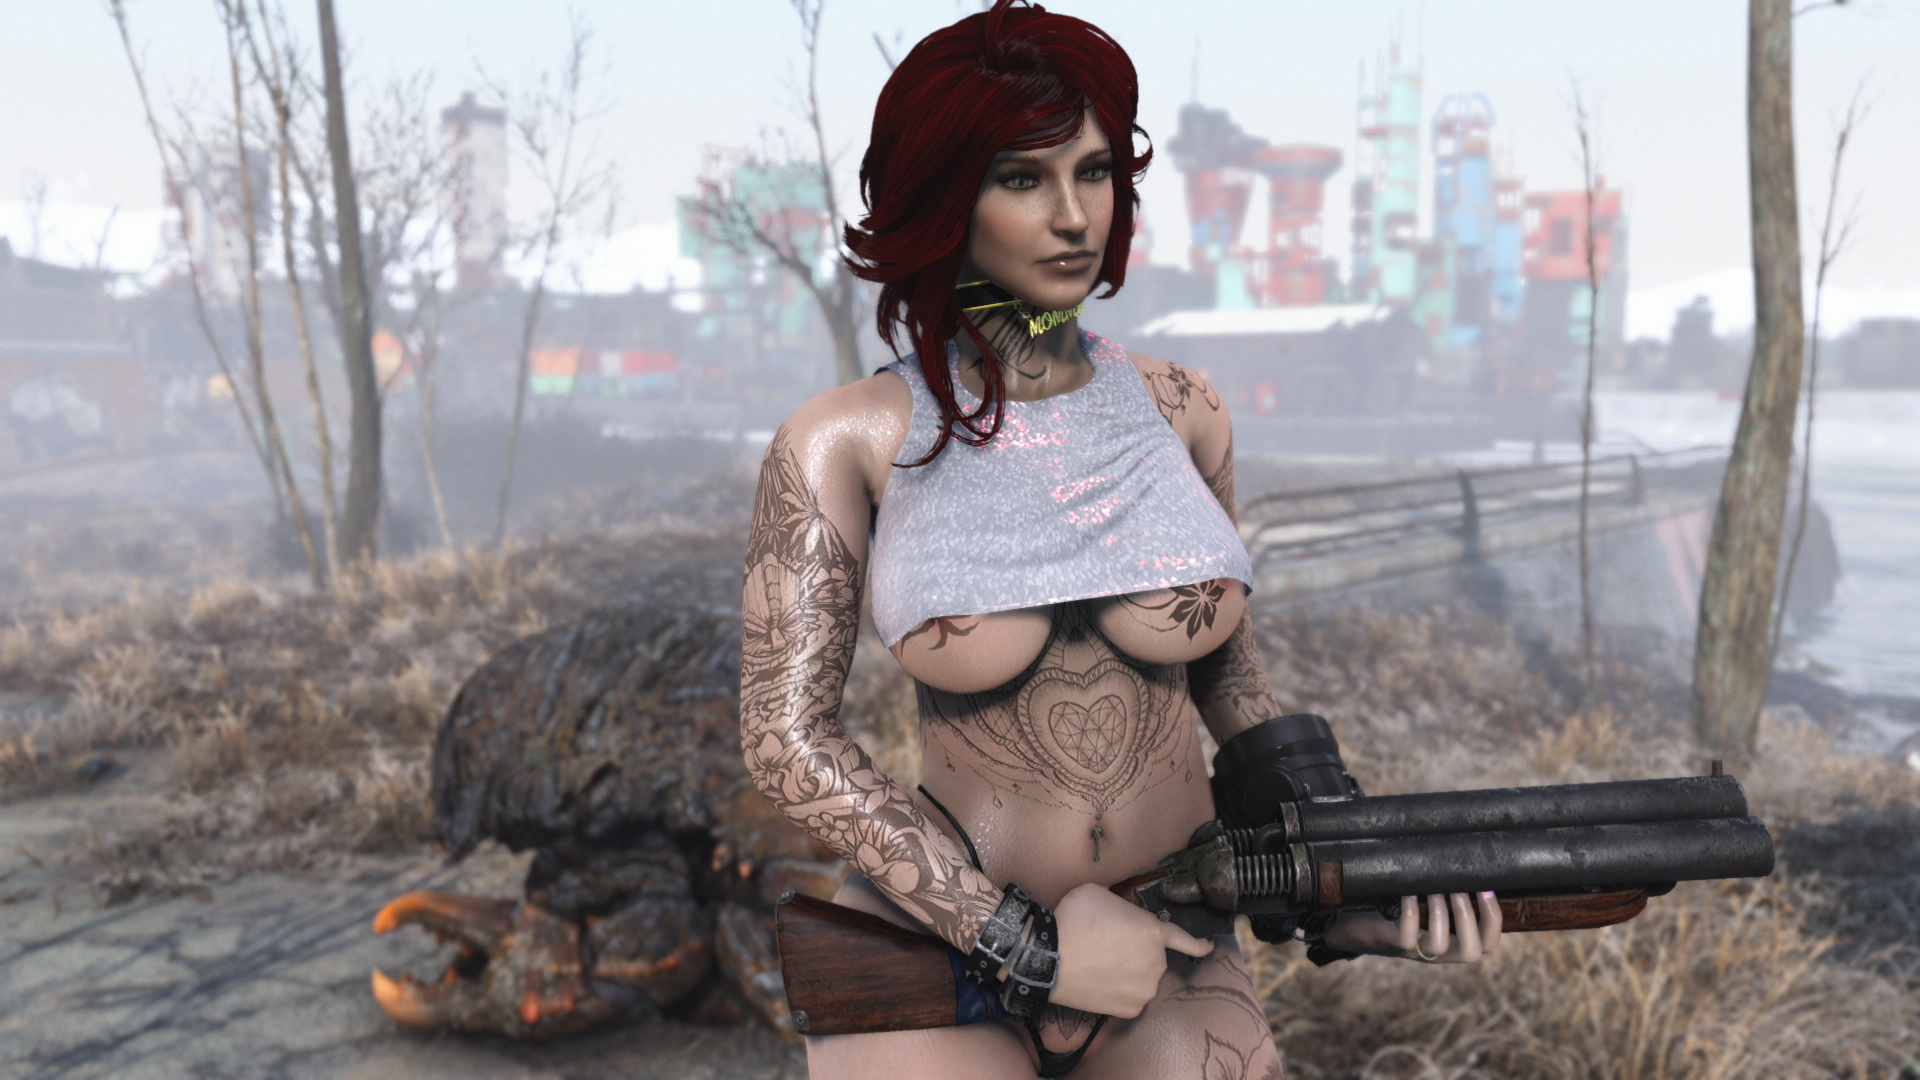 1040434856_Fallout42020-04-0106-19-44.png.c0b43c338e47673932a13220f37fe6a8.png